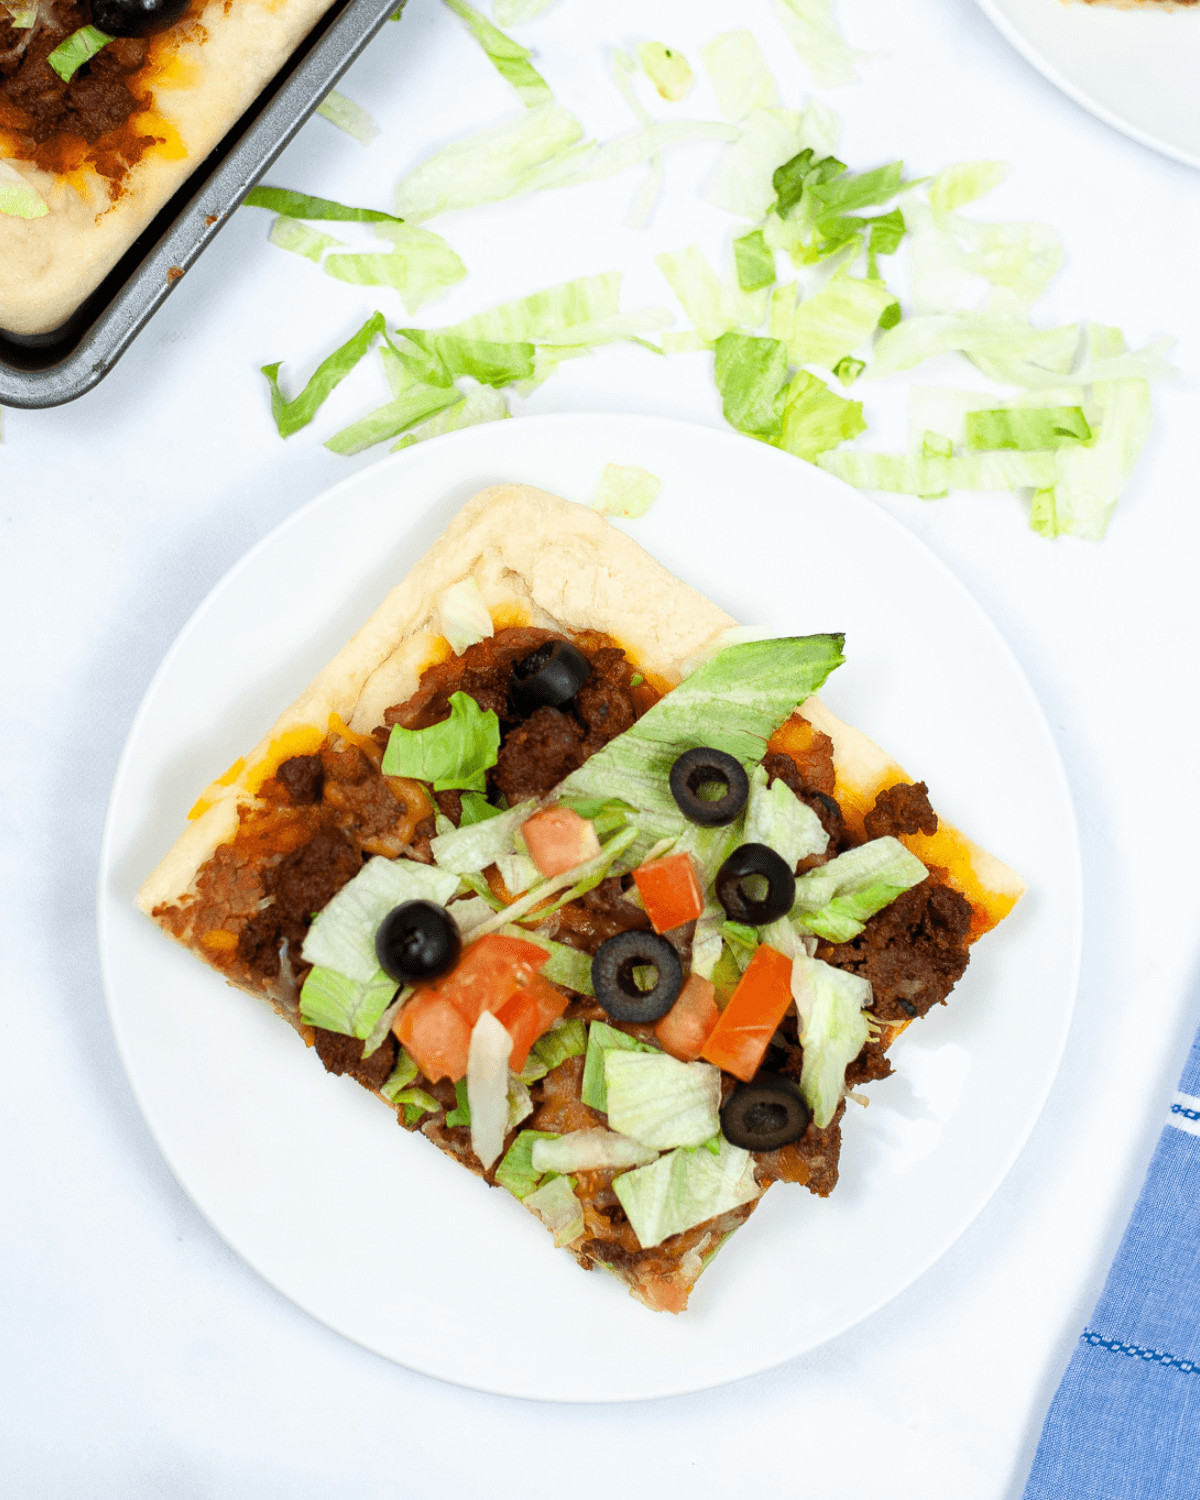 A slice of Mexican taco pizza topped with lettuce, tomatoes, and black olives on a white plate, with more pizza and lettuce in the background.